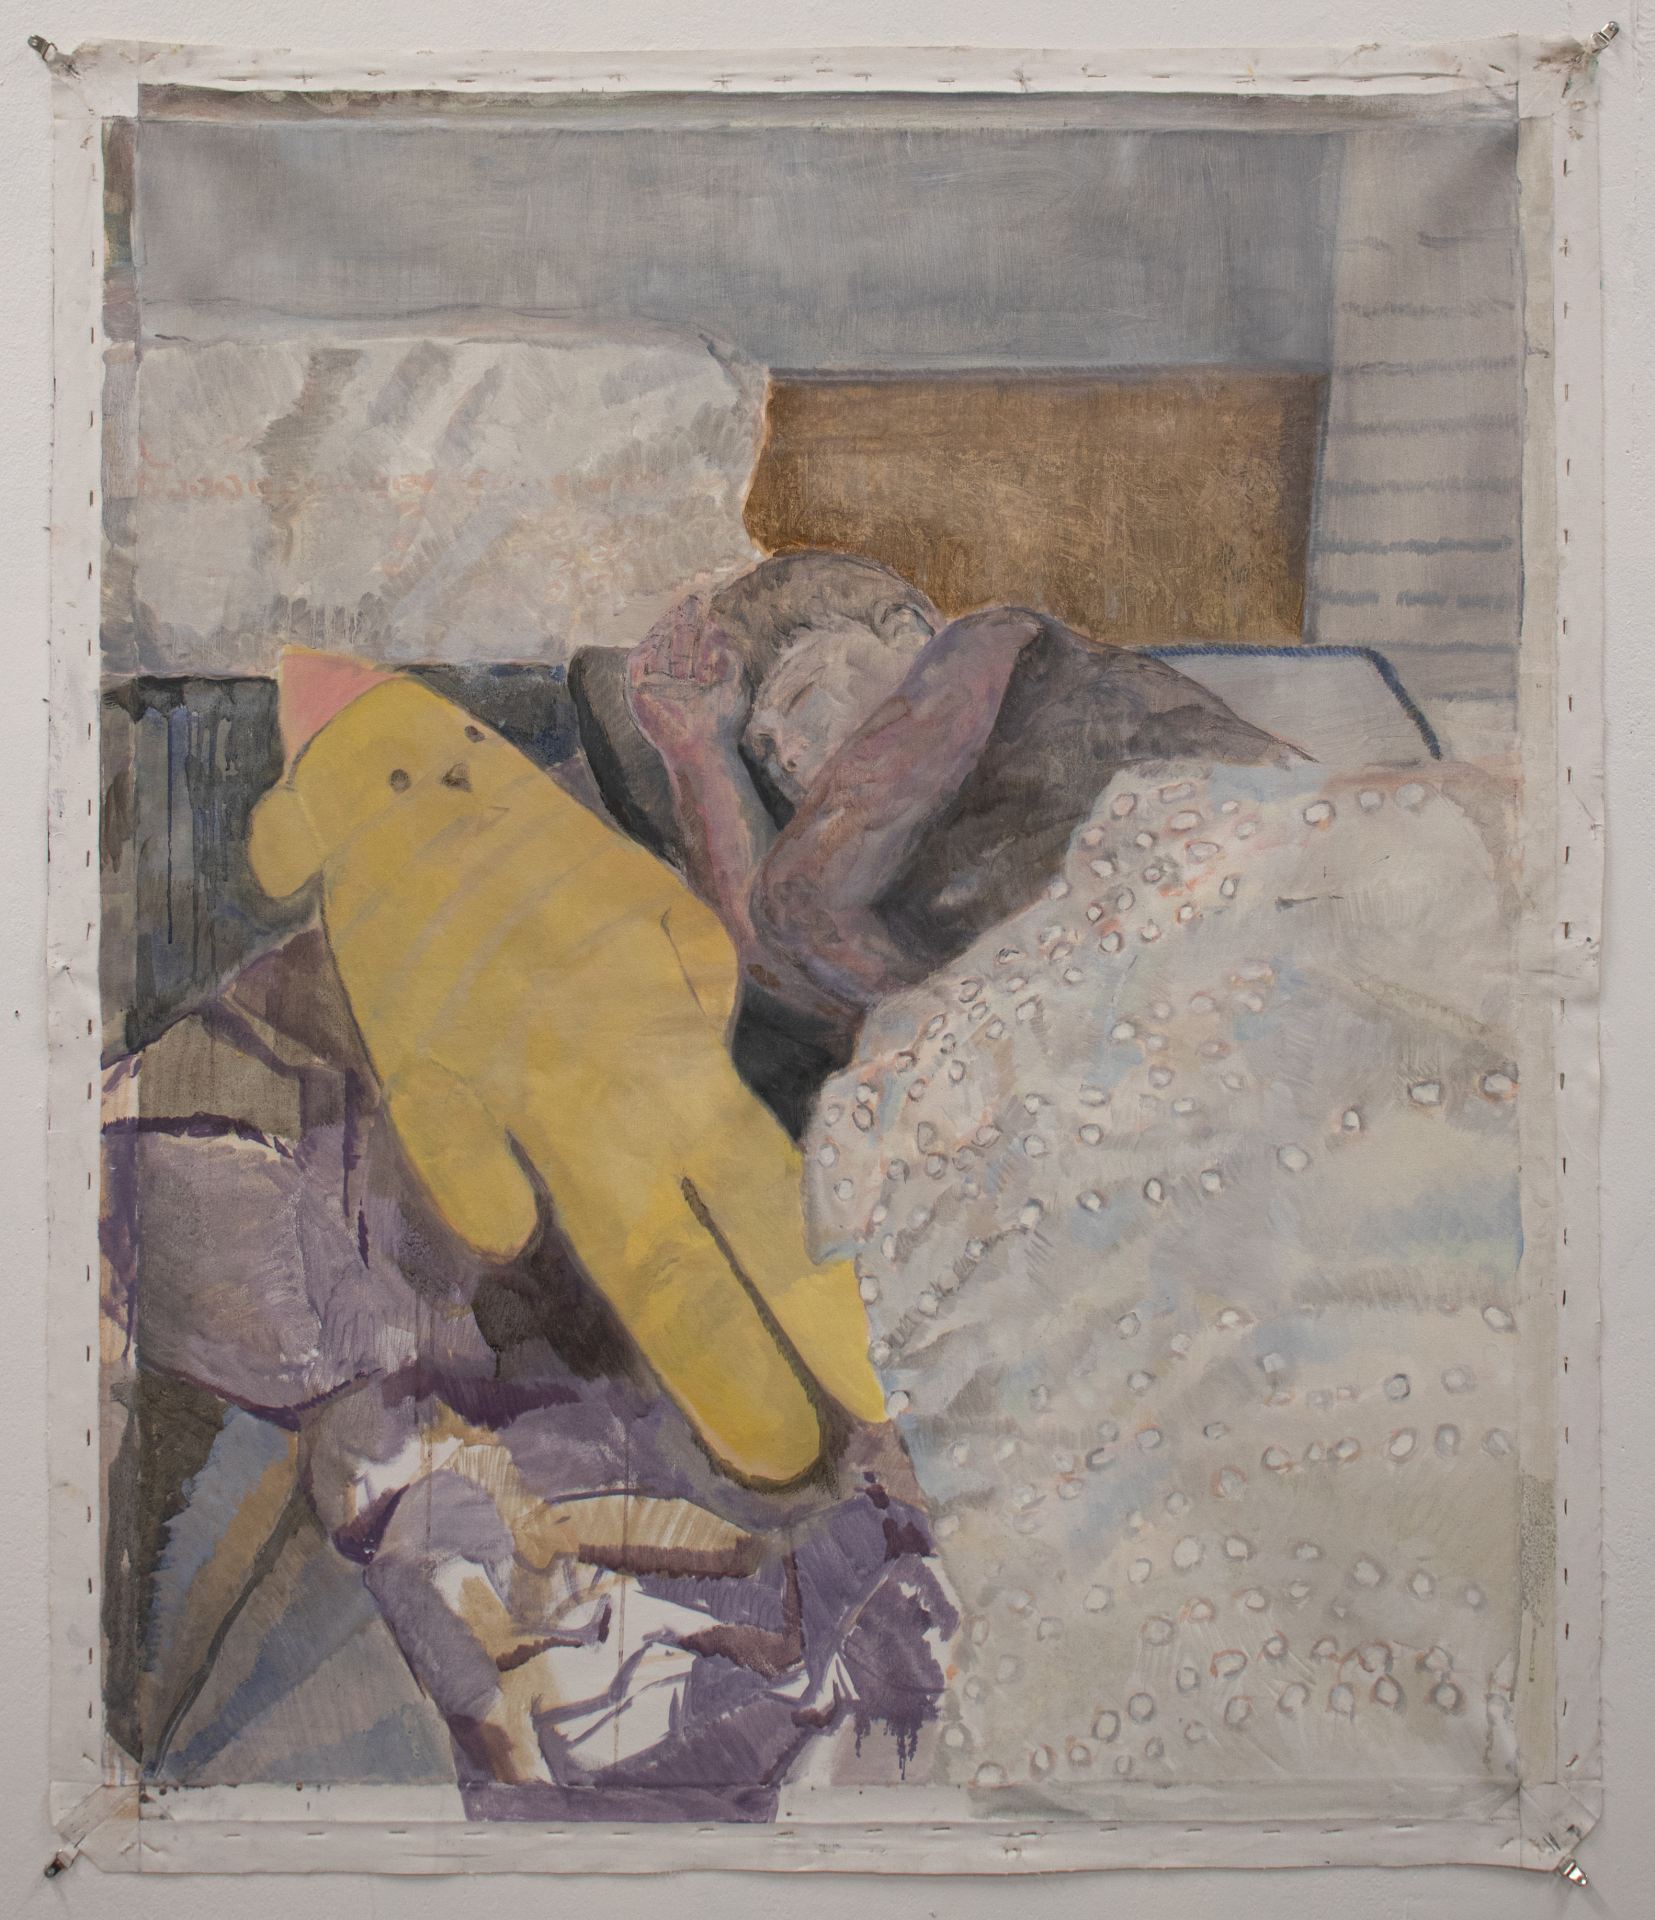 An oil painting of a person sleeping with a yellow soft toy